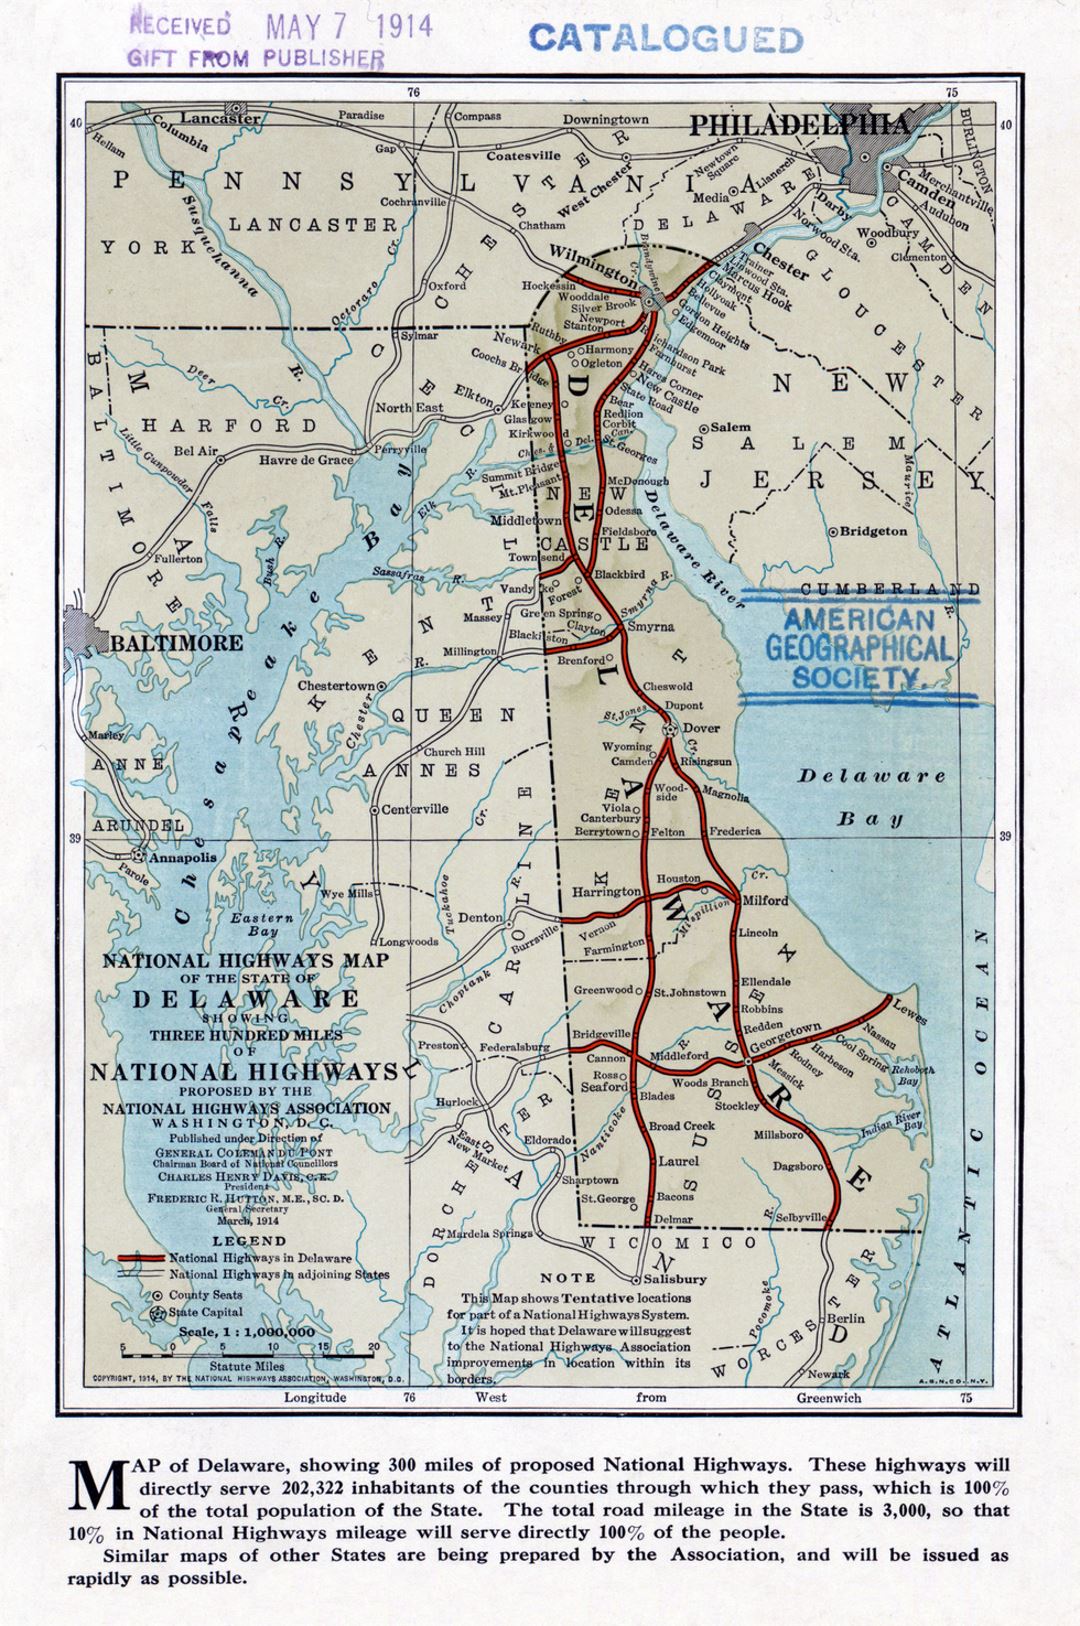 Detailed National Highways Association old map of the state of Delaware - 1914